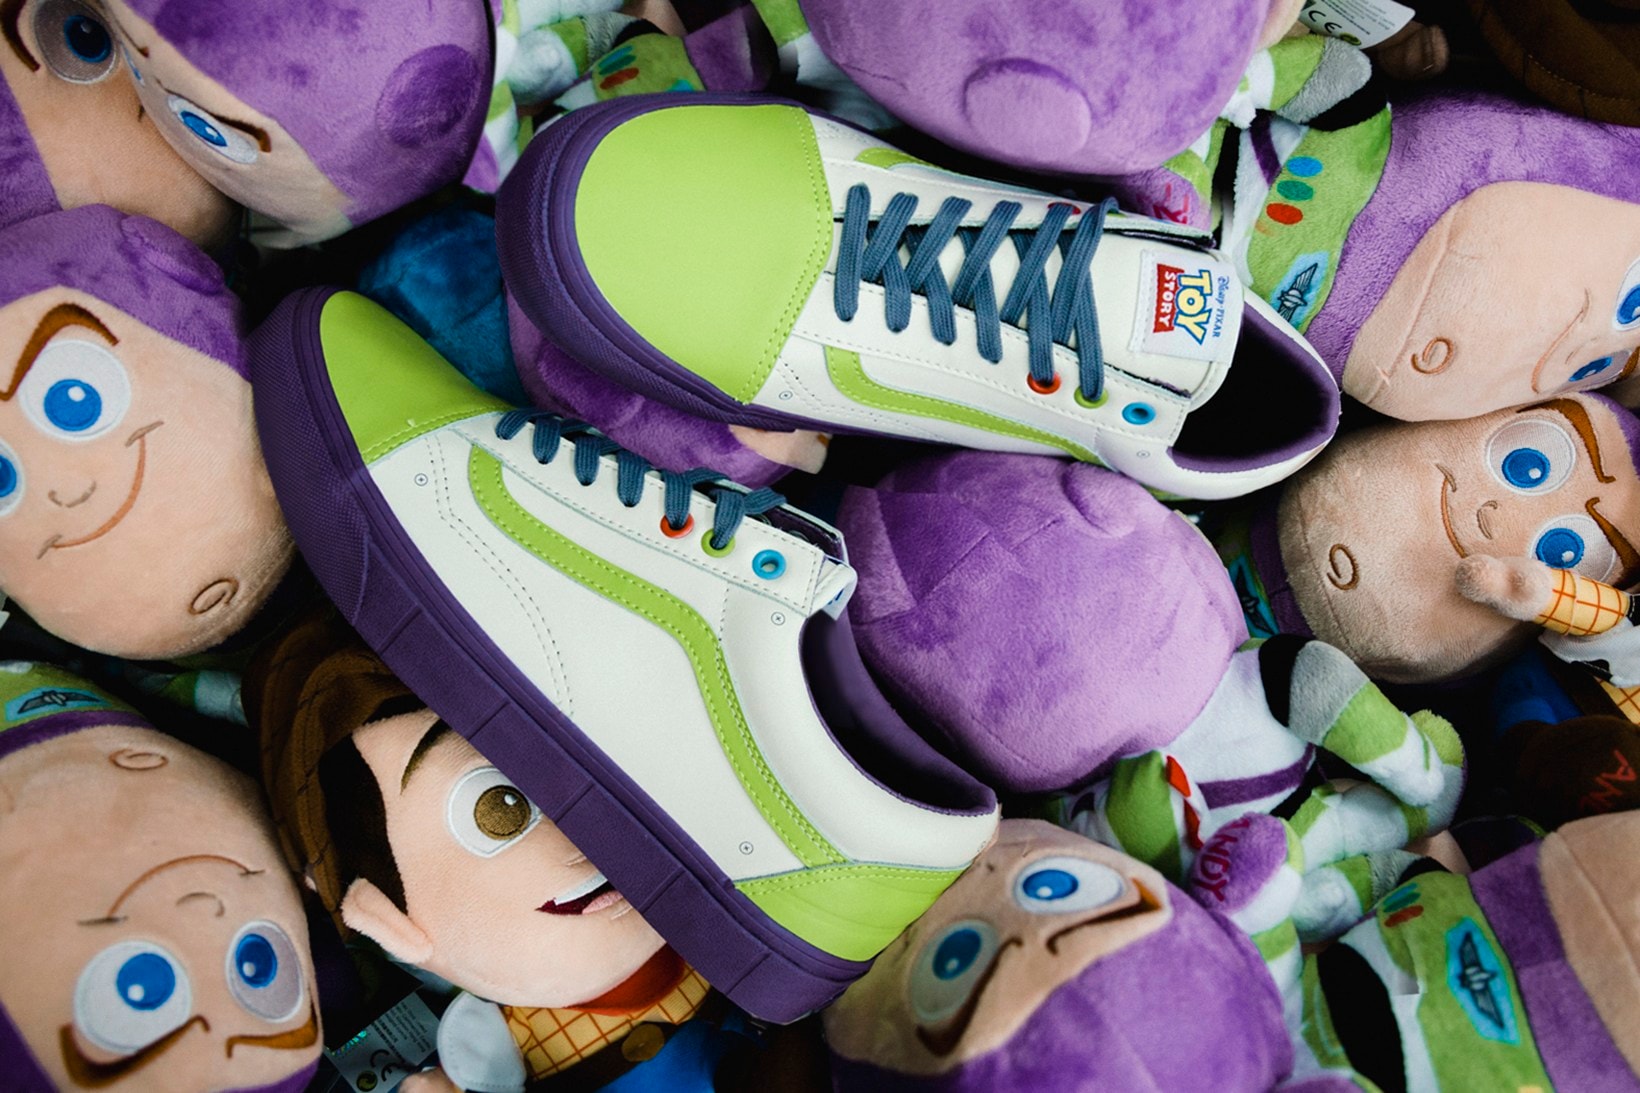 Toy Story x Vans Footwear Collection